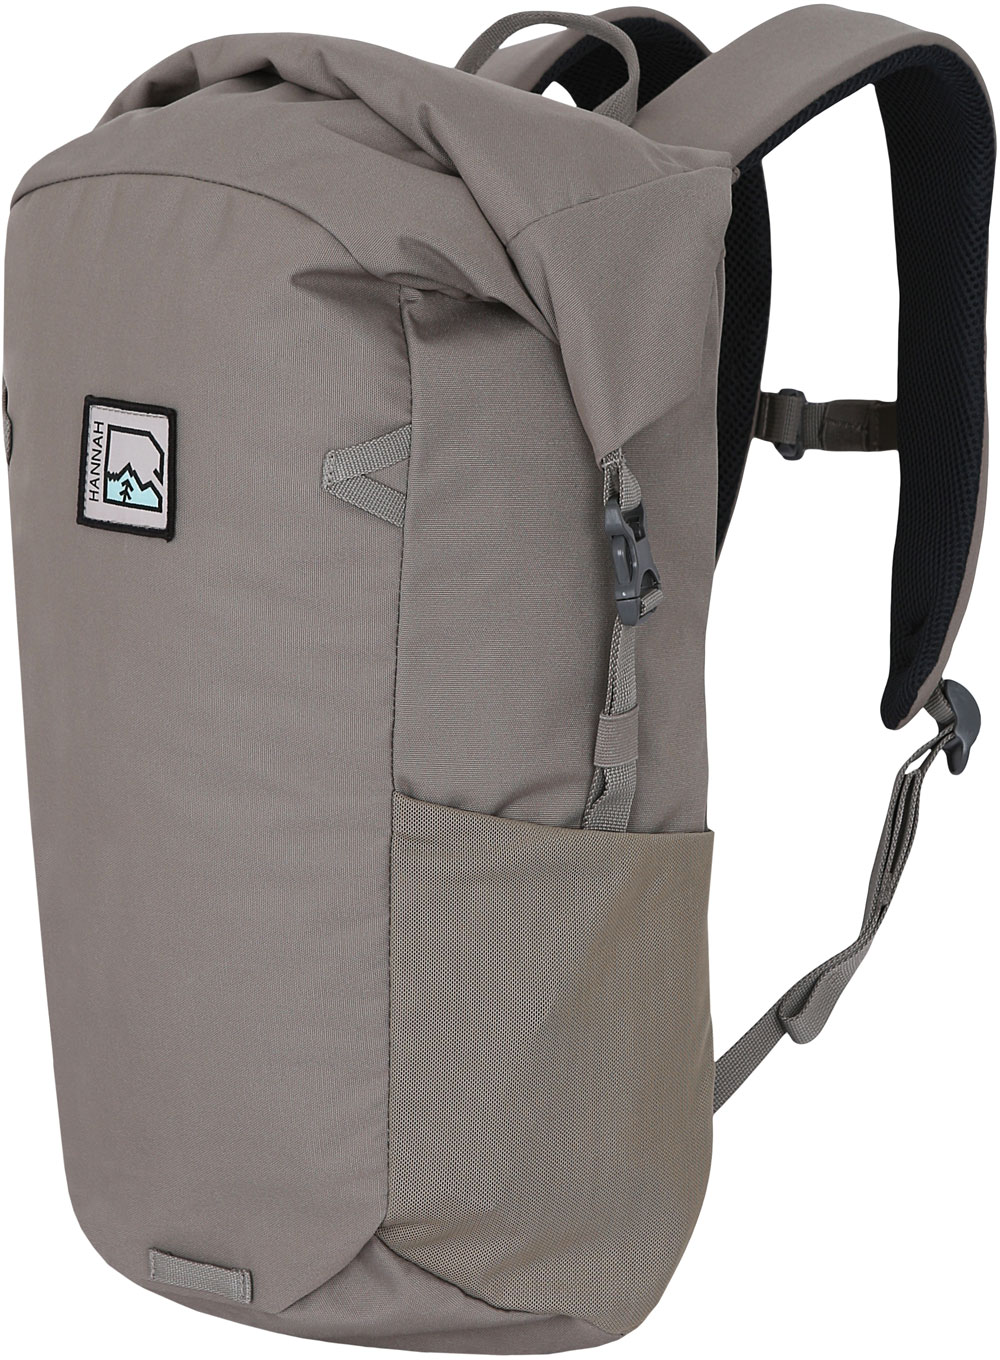 City backpack with a laptop chamber